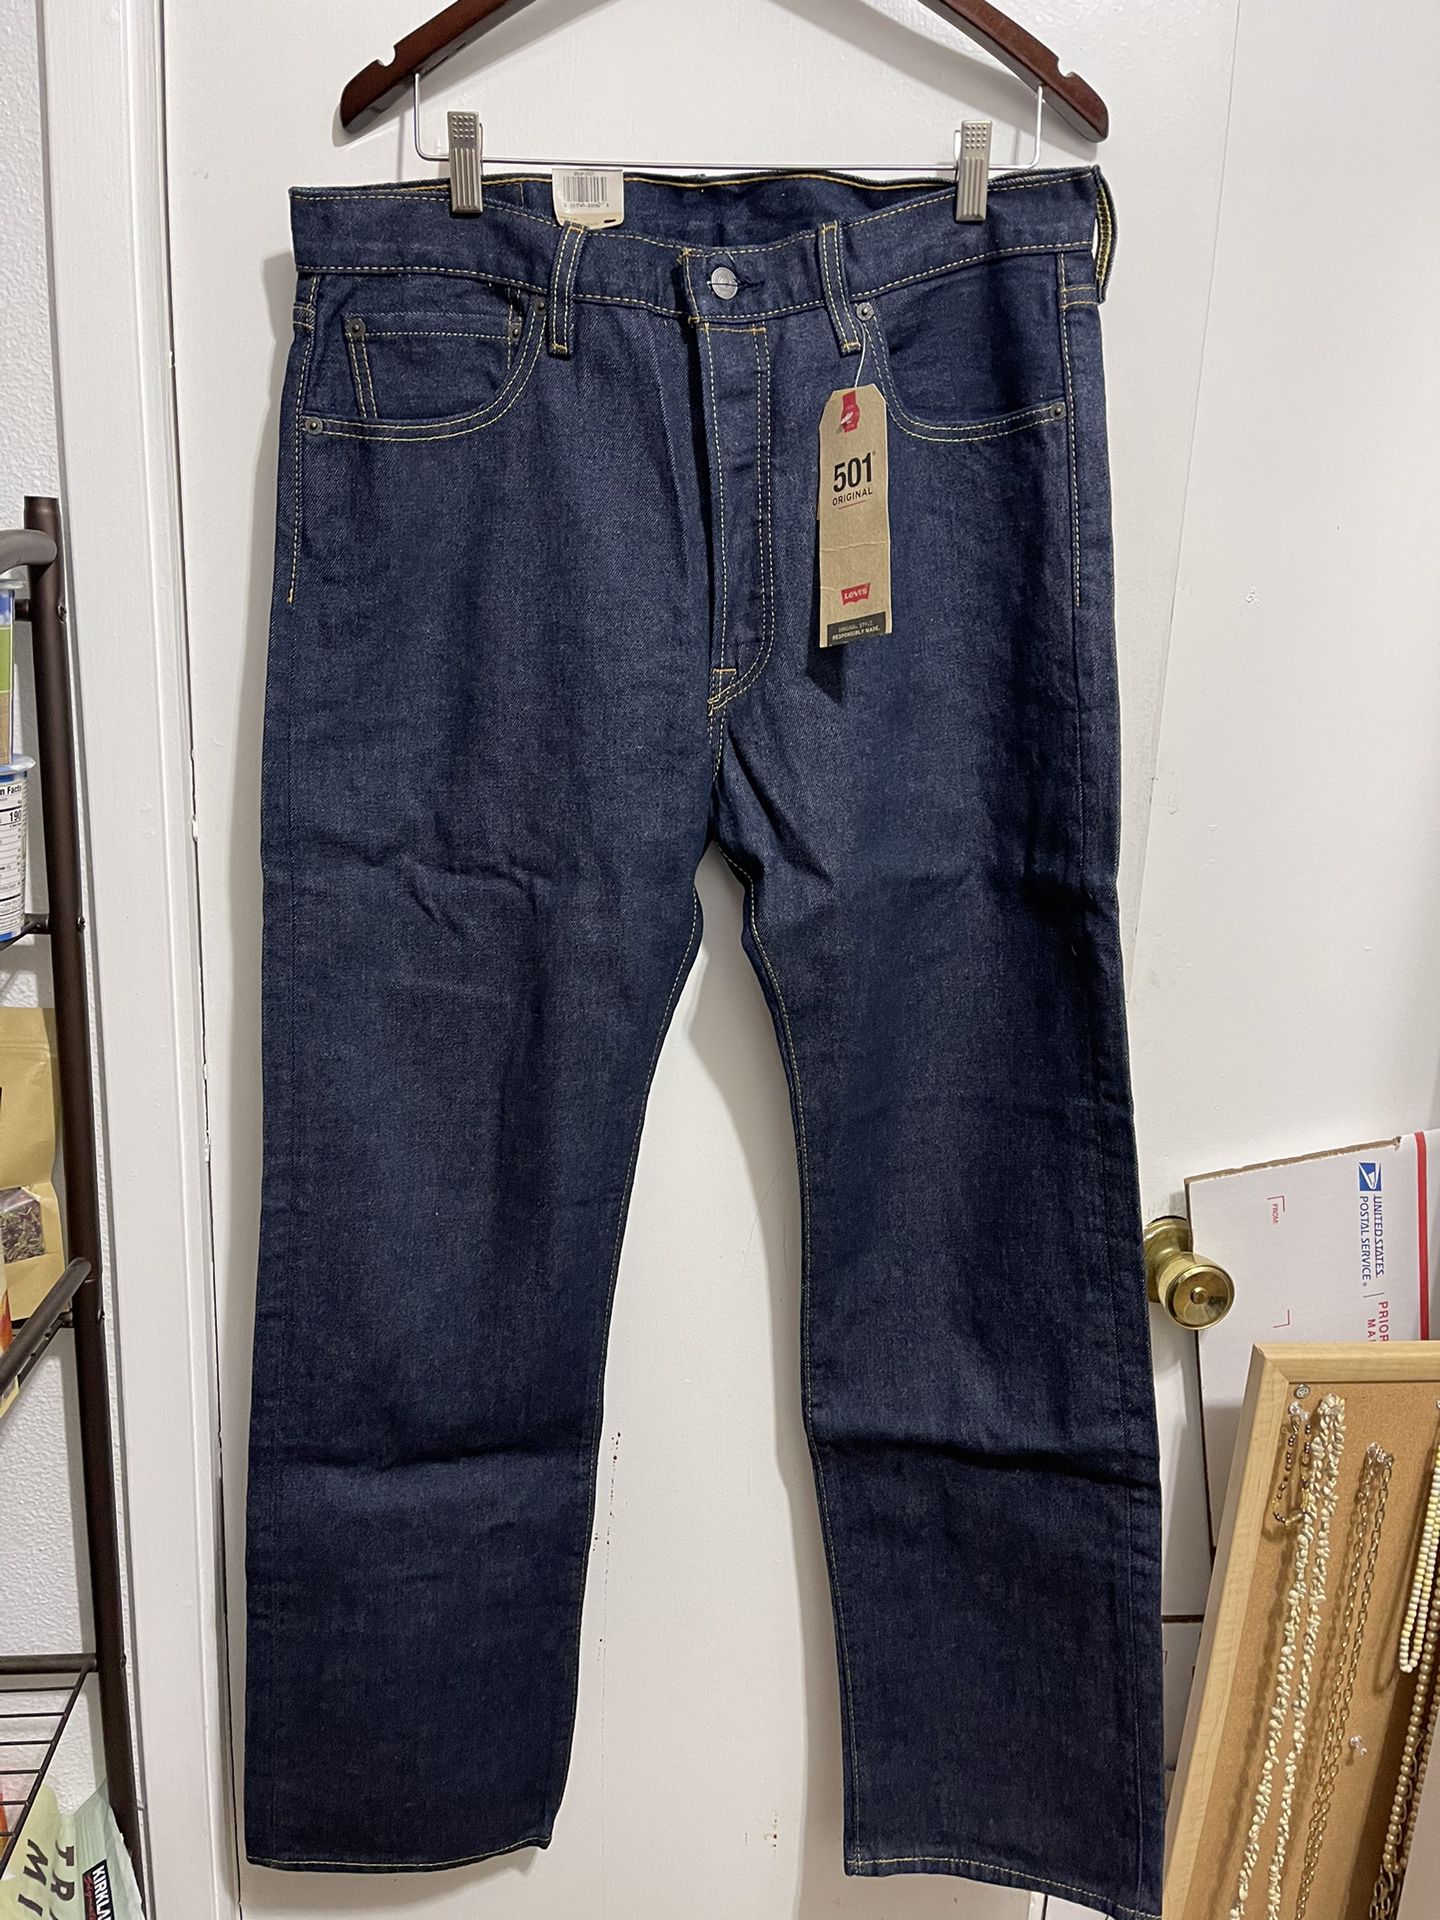 Men’s Levi’s 501 Denim Stretch Jeans 35x32 for Sale in Lacey, WA - OfferUp